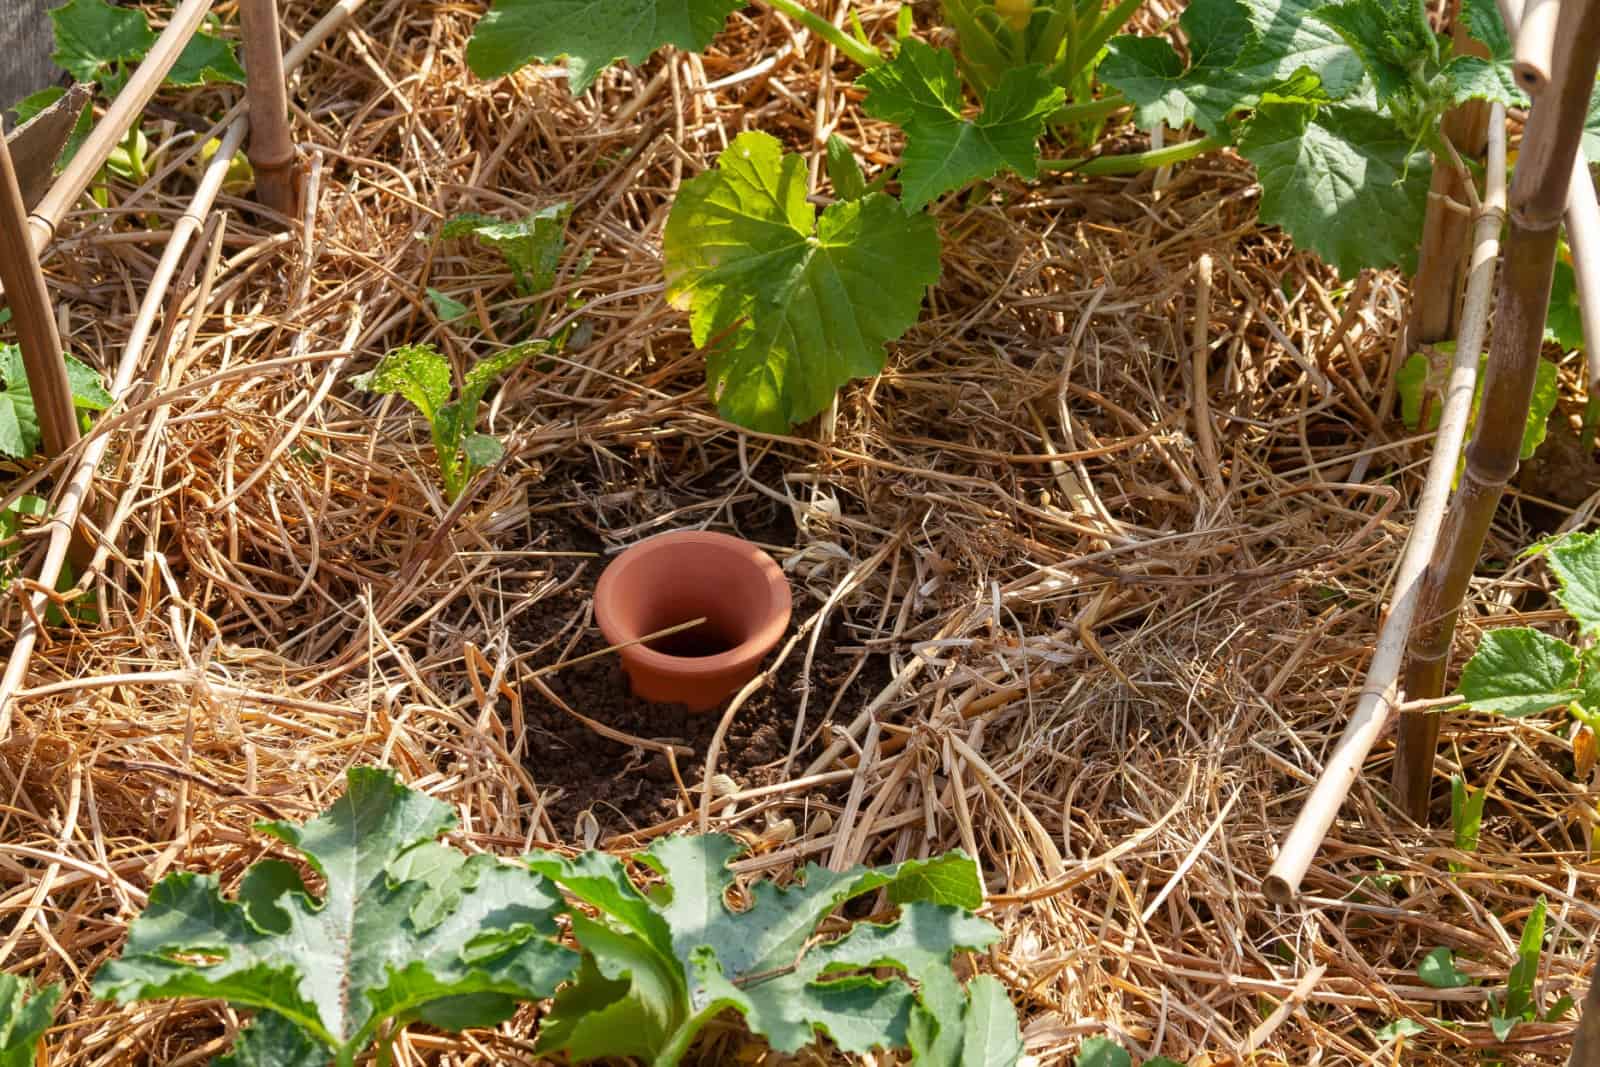 olla irrigation system used in a vegetable garden